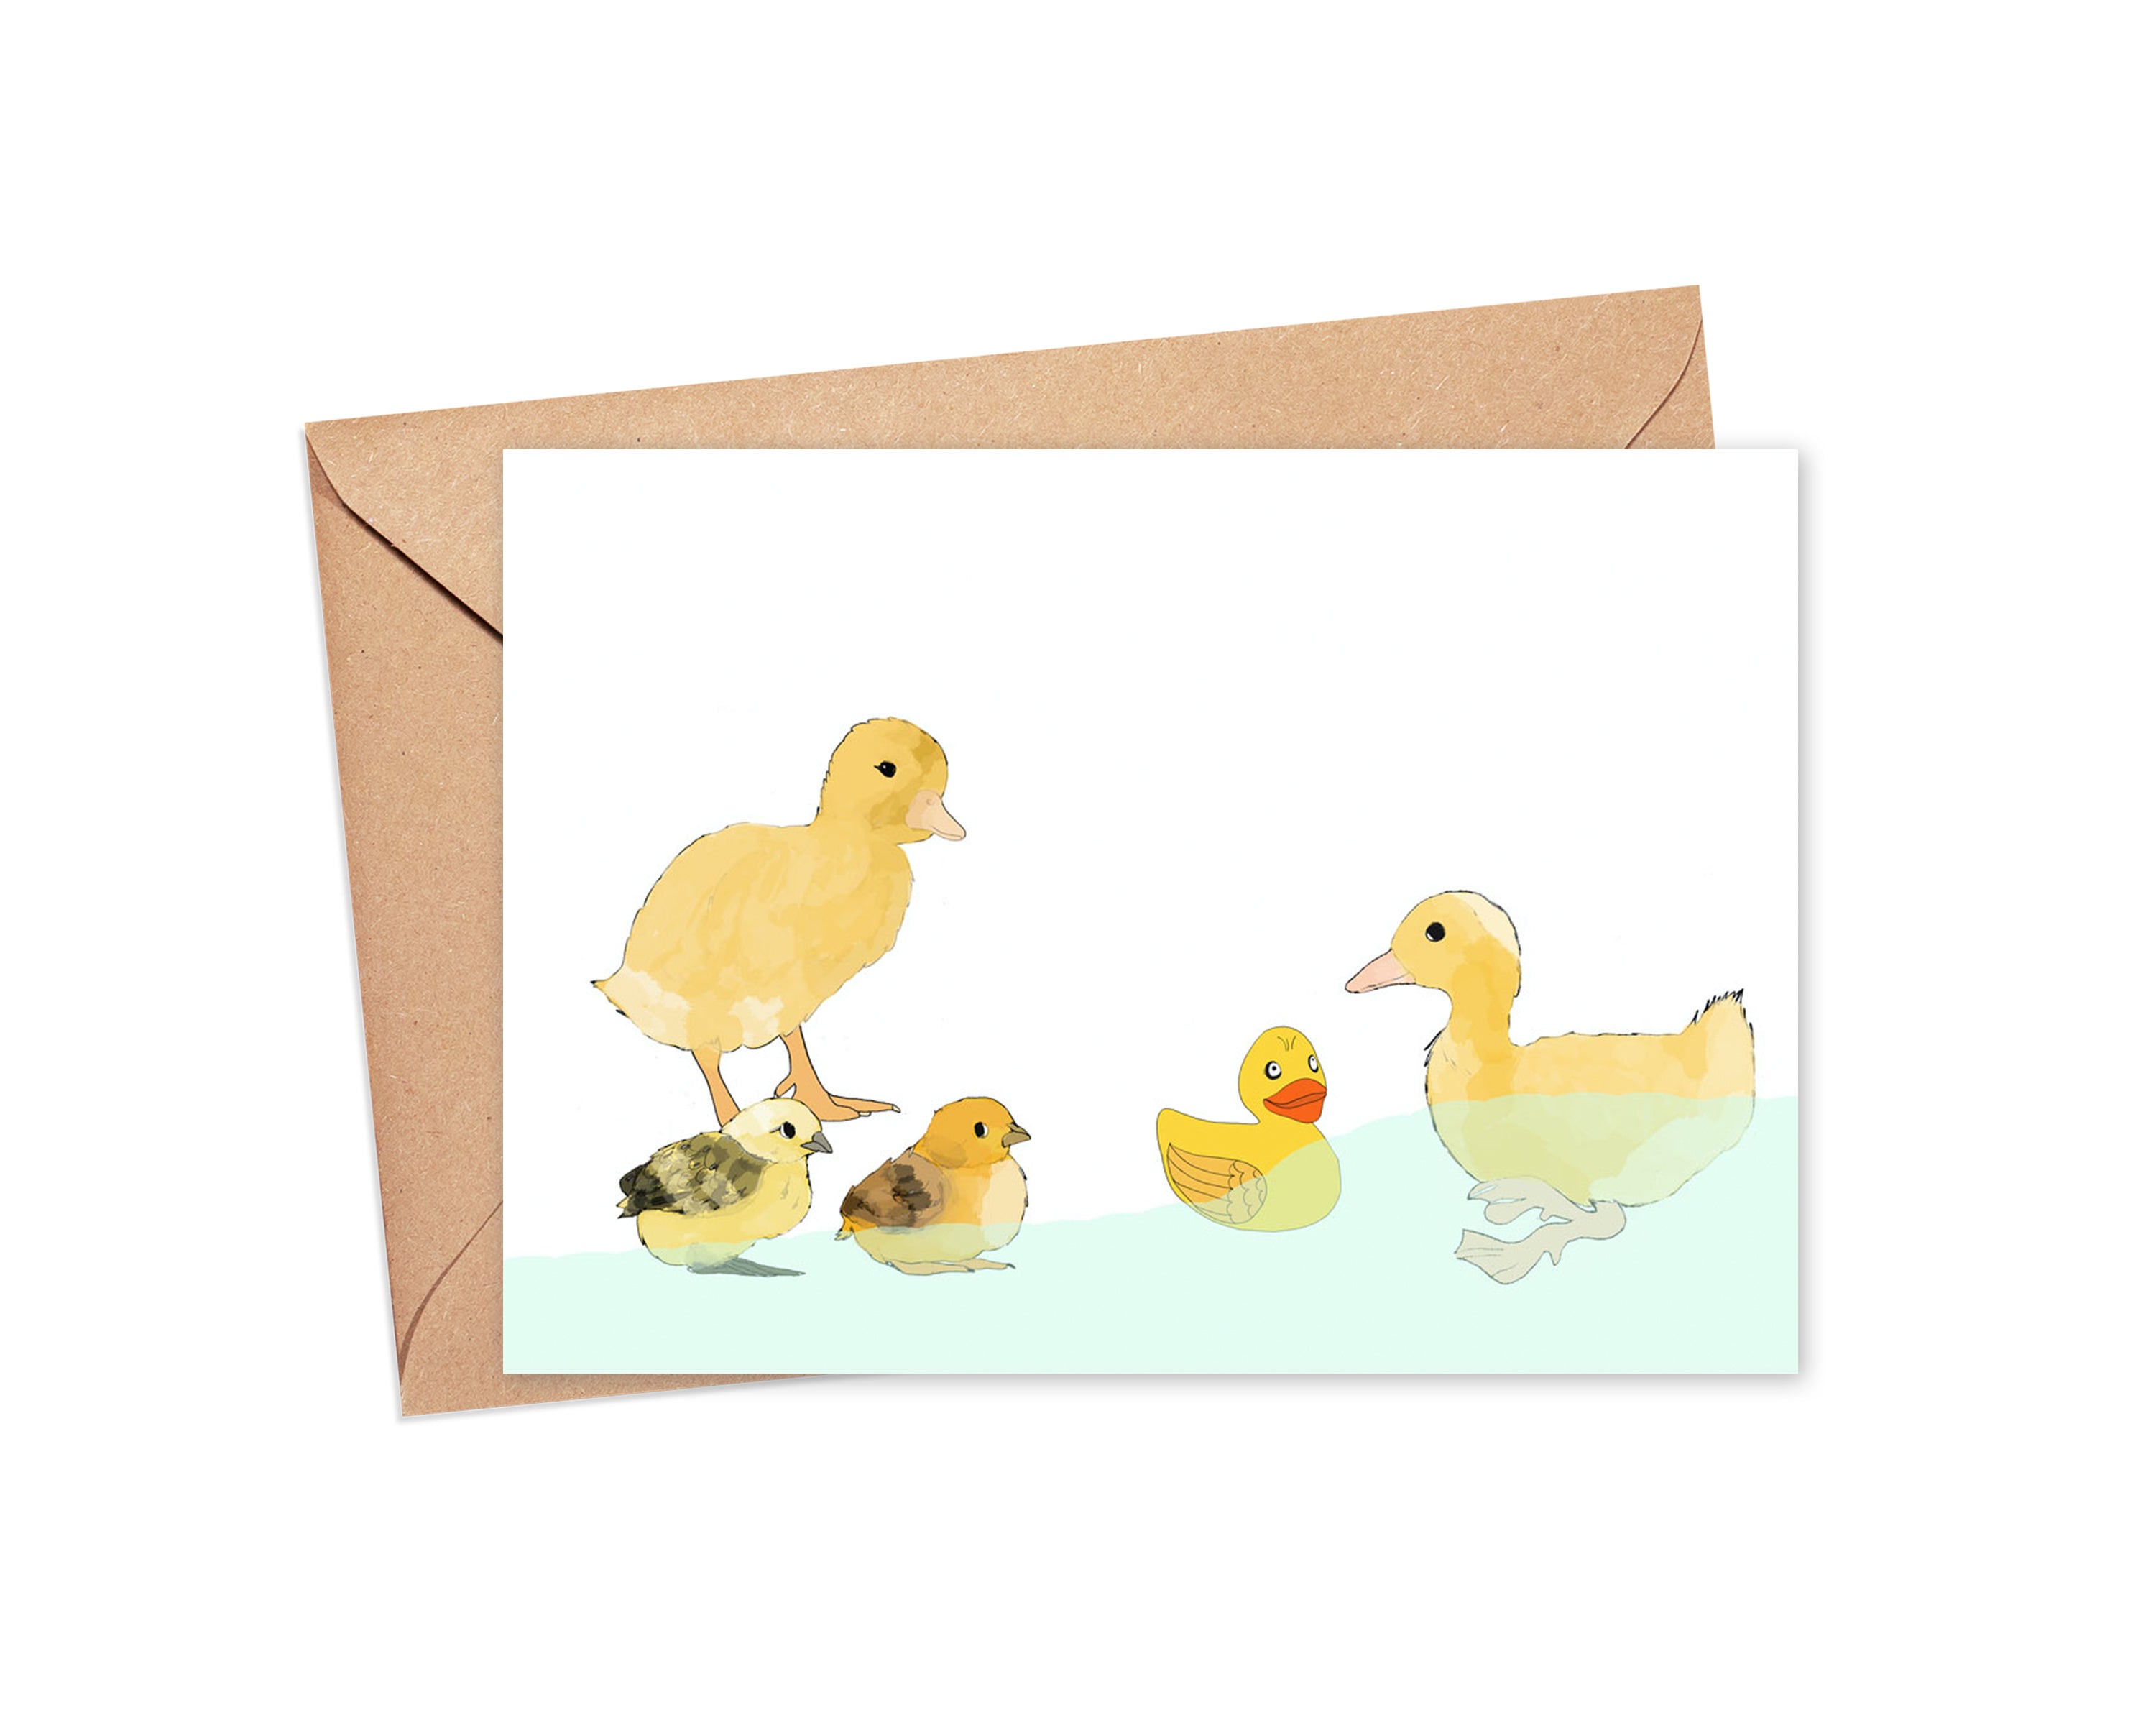 "You quack me up" Blank Card